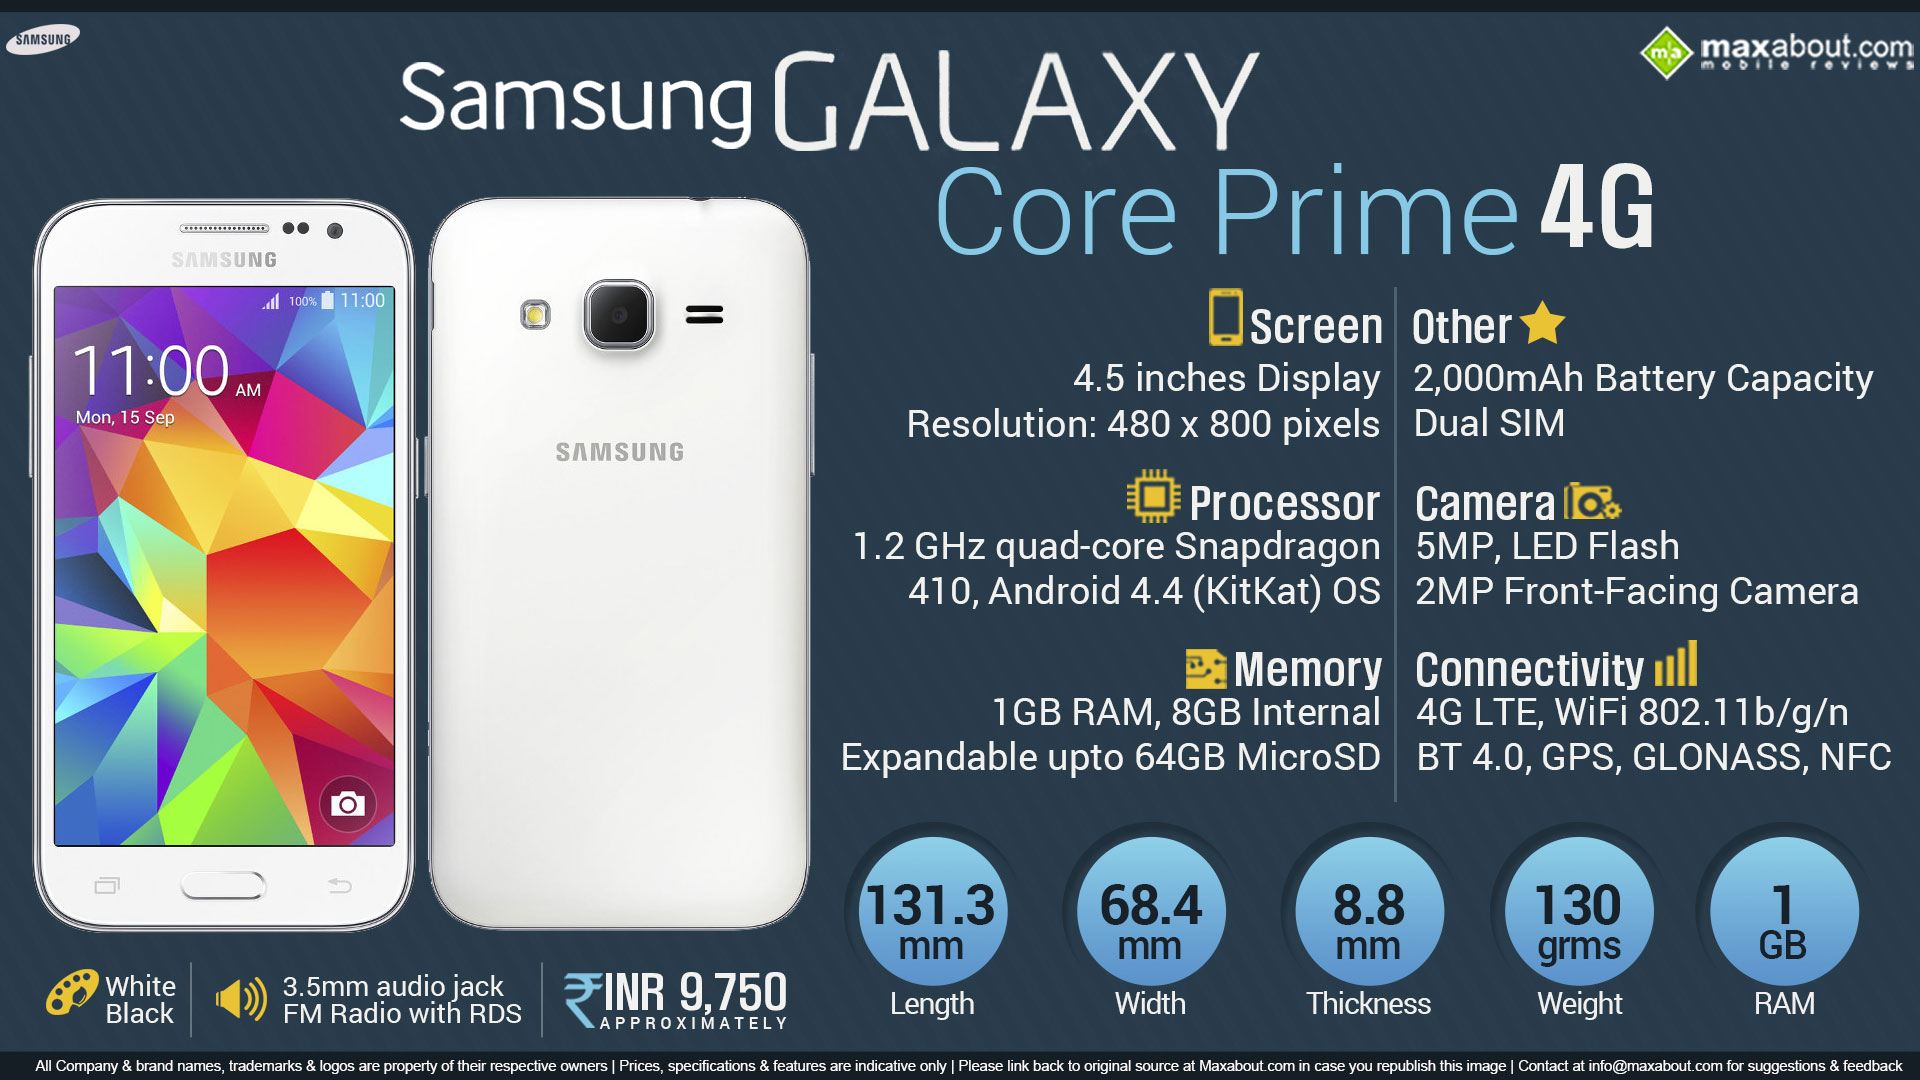 Mobile Phone Infographics Image - Samsung Galaxy Core Prime - HD Wallpaper 